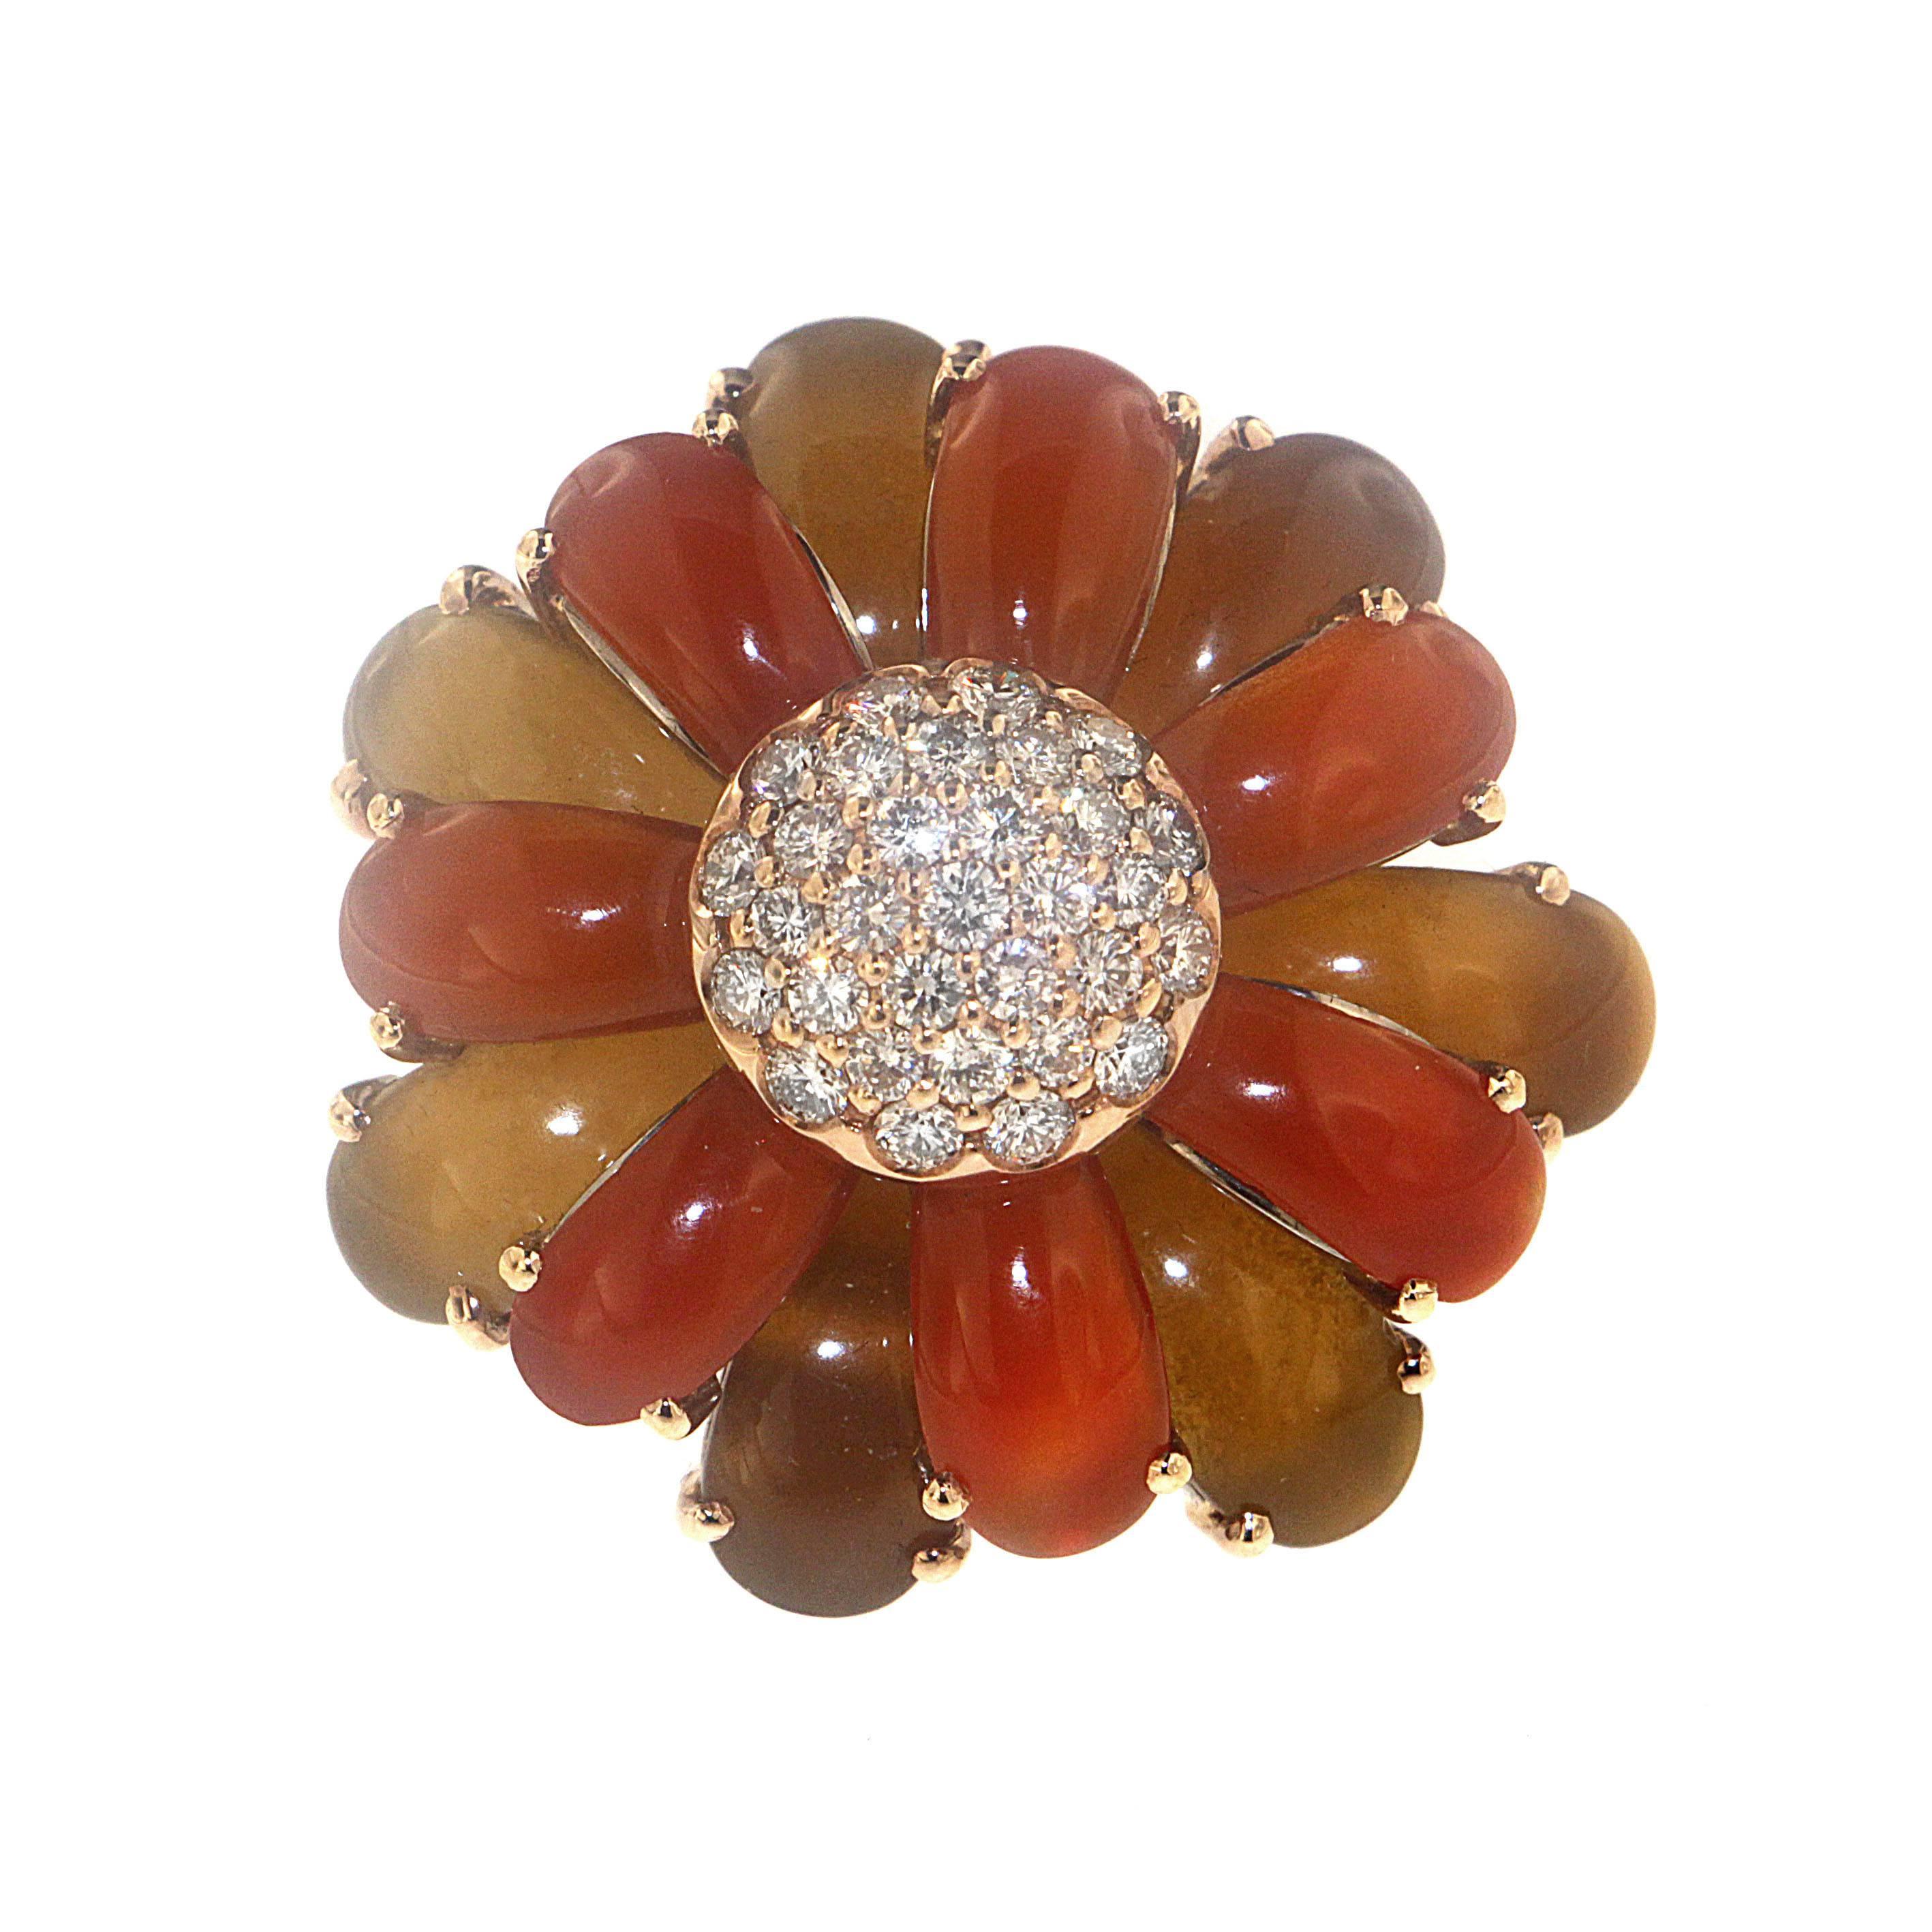 Zorab captures the bright and bountiful blossom of the sunflower always seeking the sun. With blooming petals made from 11.17 carats of Carnelian and 11.17 carats of Yellow Chalcedony, this symbolic flower features 1.11 carats of White Diamonds in